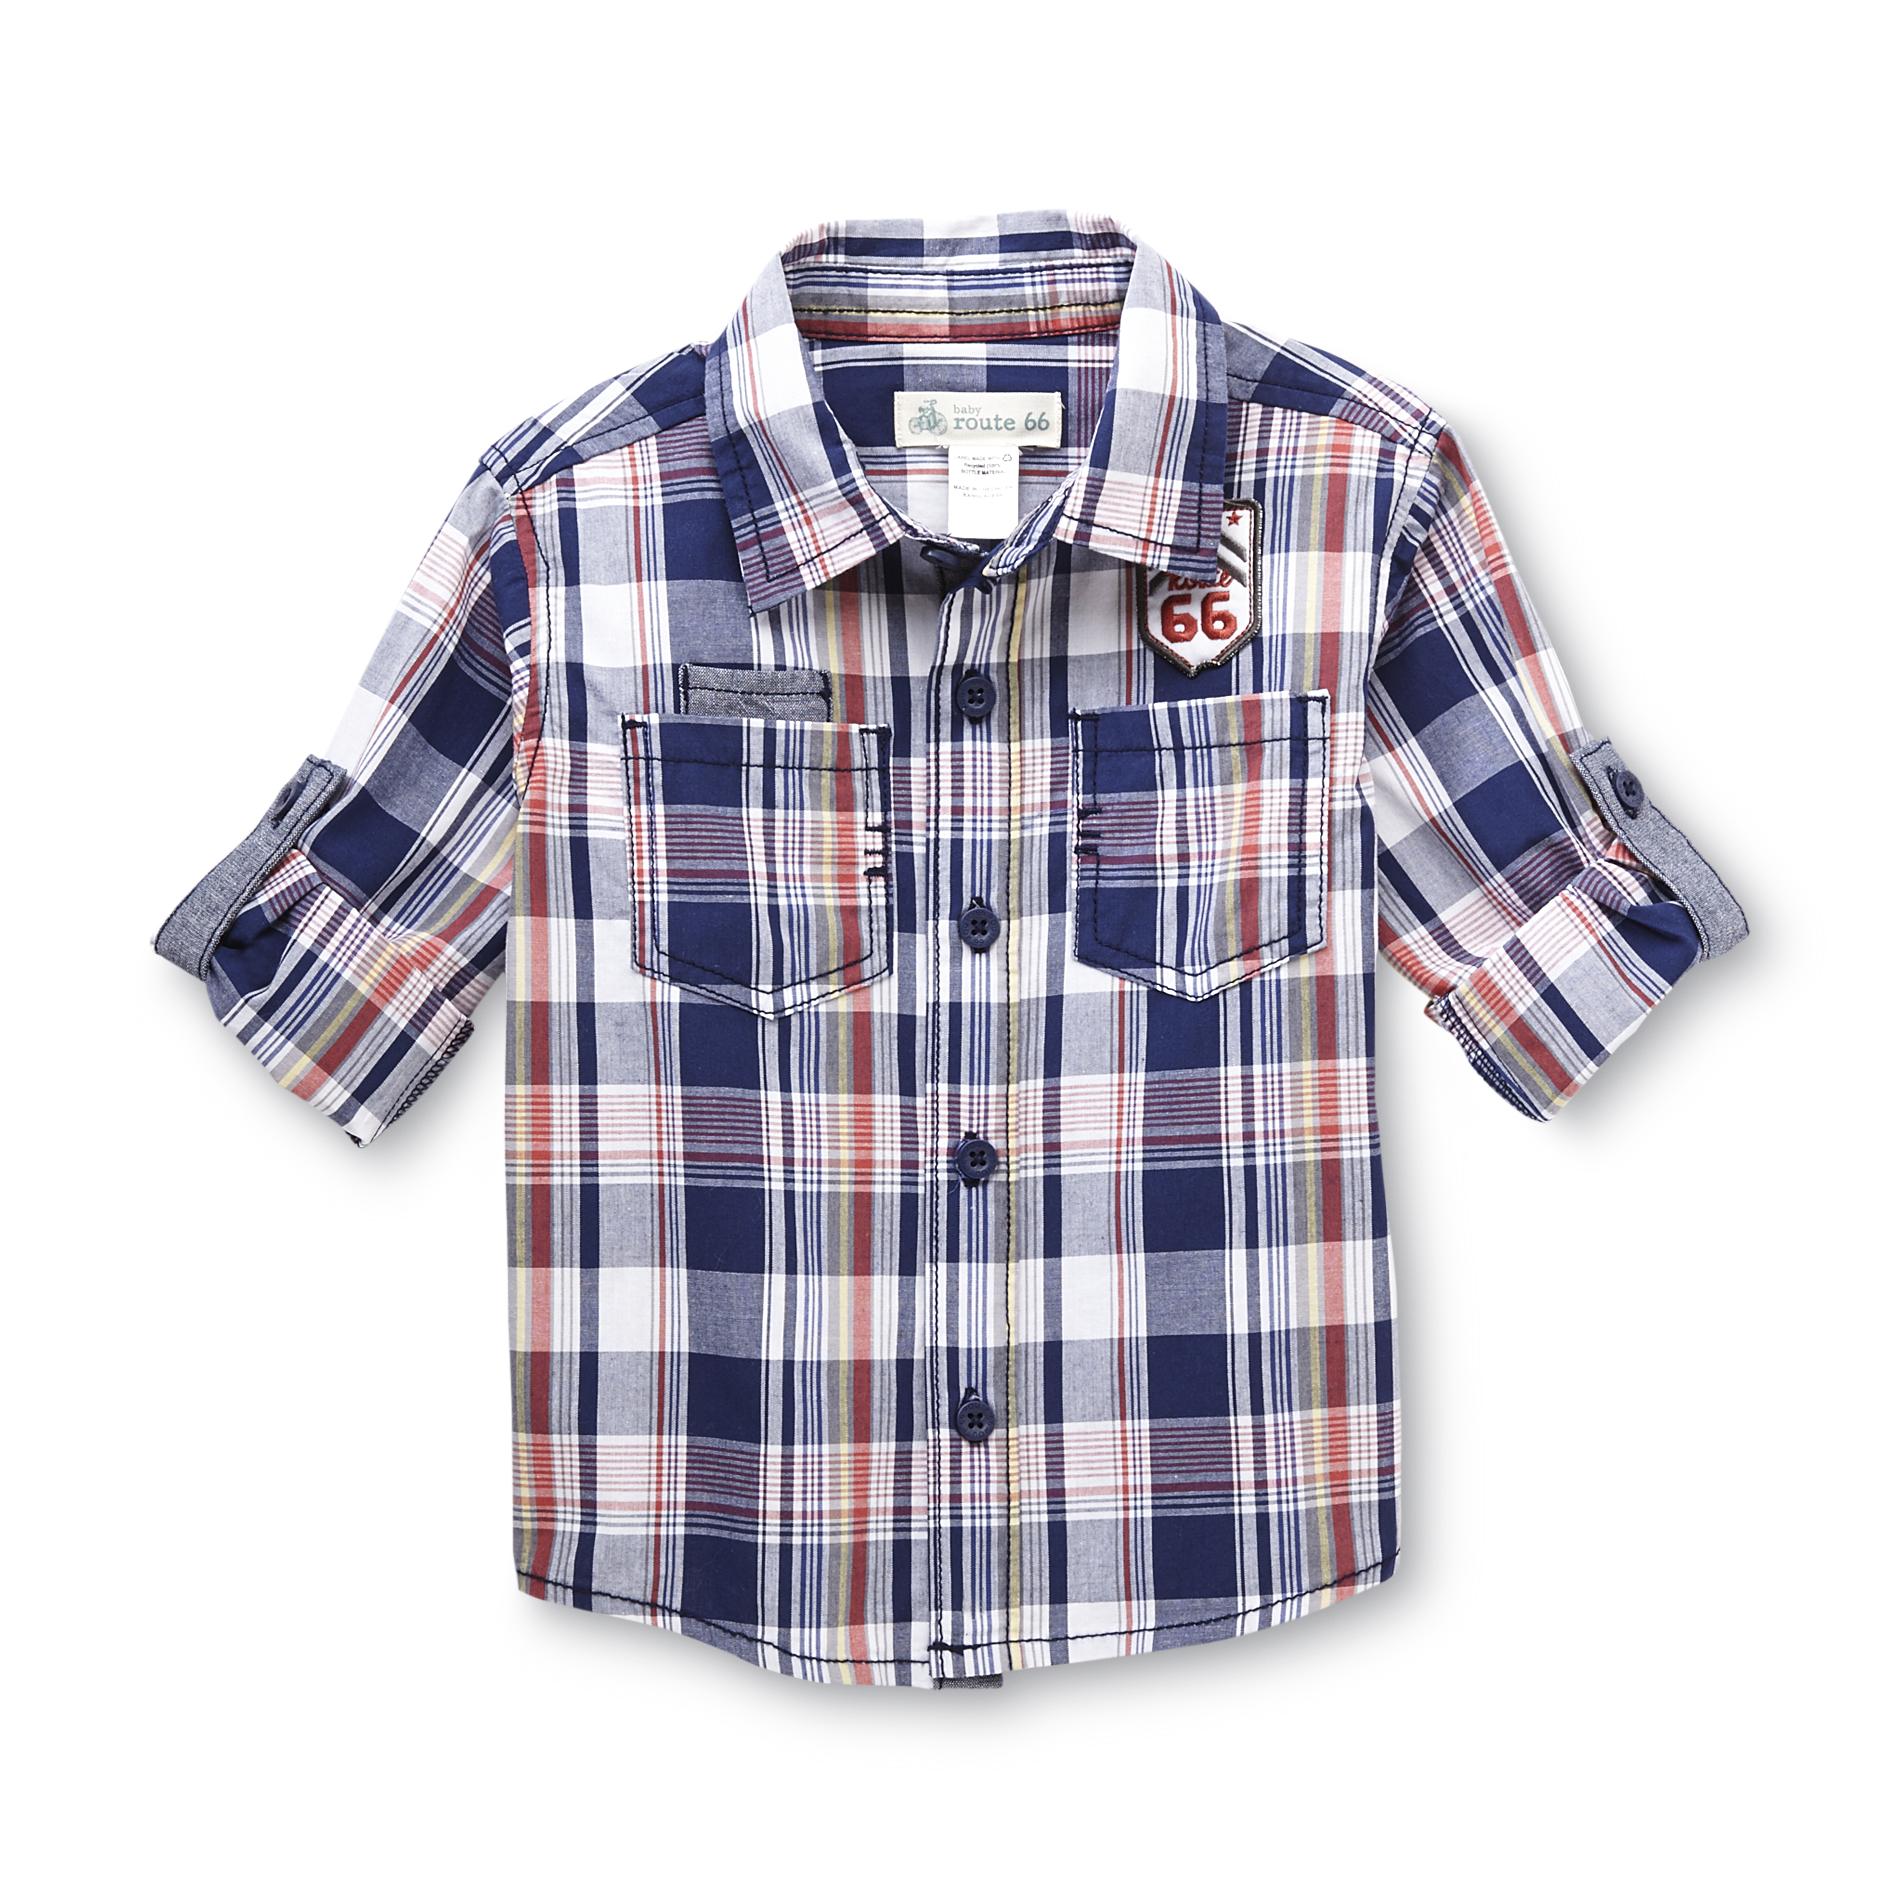 Route 66 Infant & Toddler Boy's Long-Sleeve Shirt - Plaid